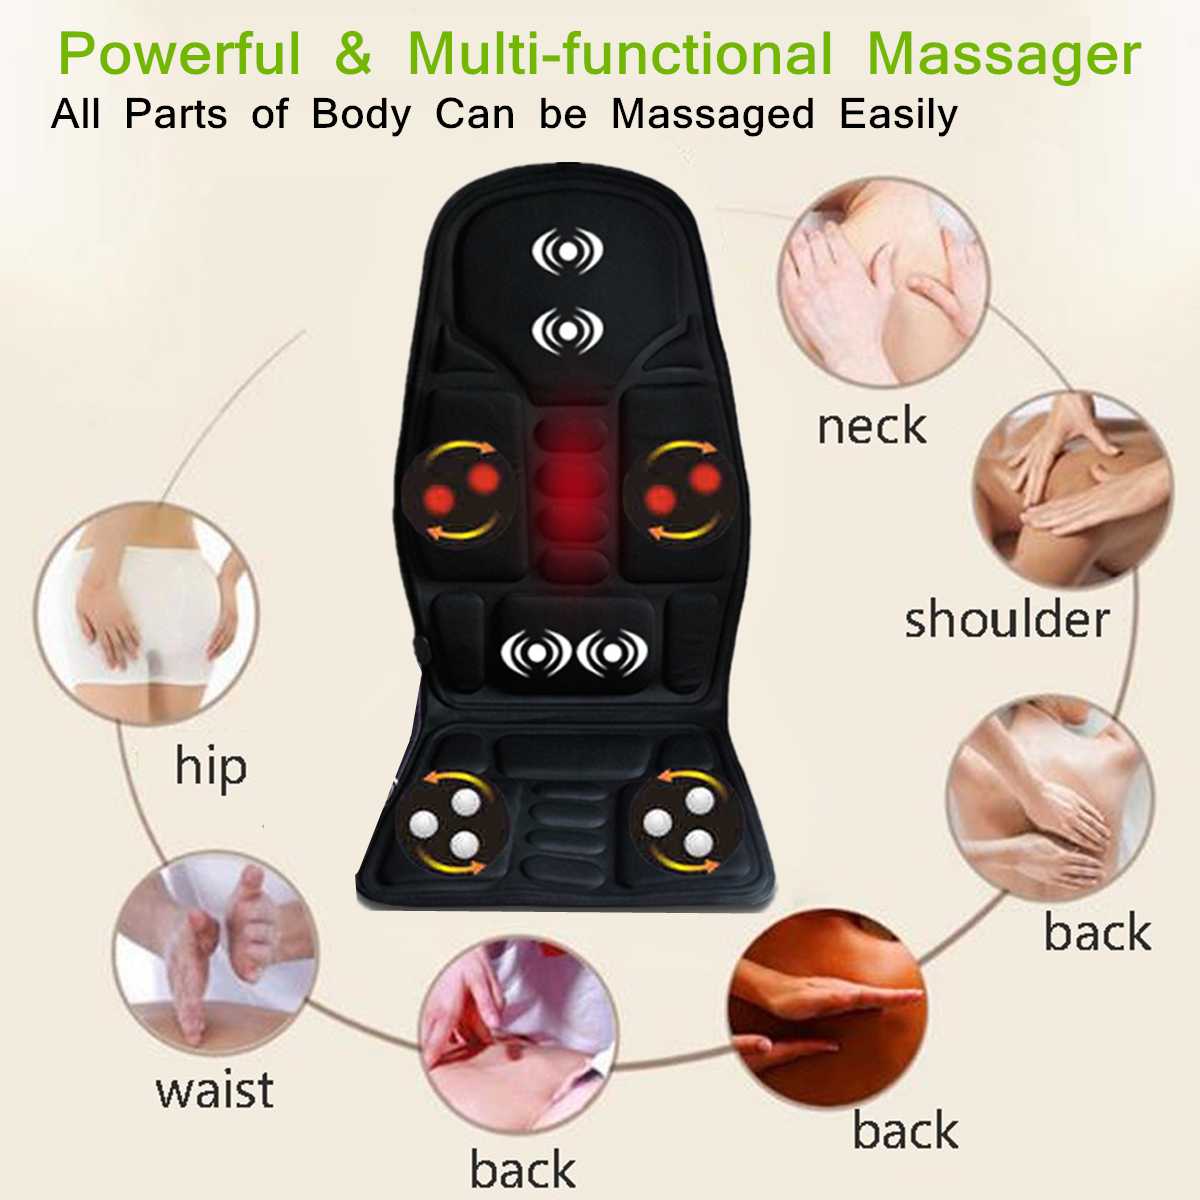 KIFIT Practical Multifunctional Car Chair Body Massage Heat Mat Seat Cover Cushion Neck Pain Lumbar Support Pad Back Massager